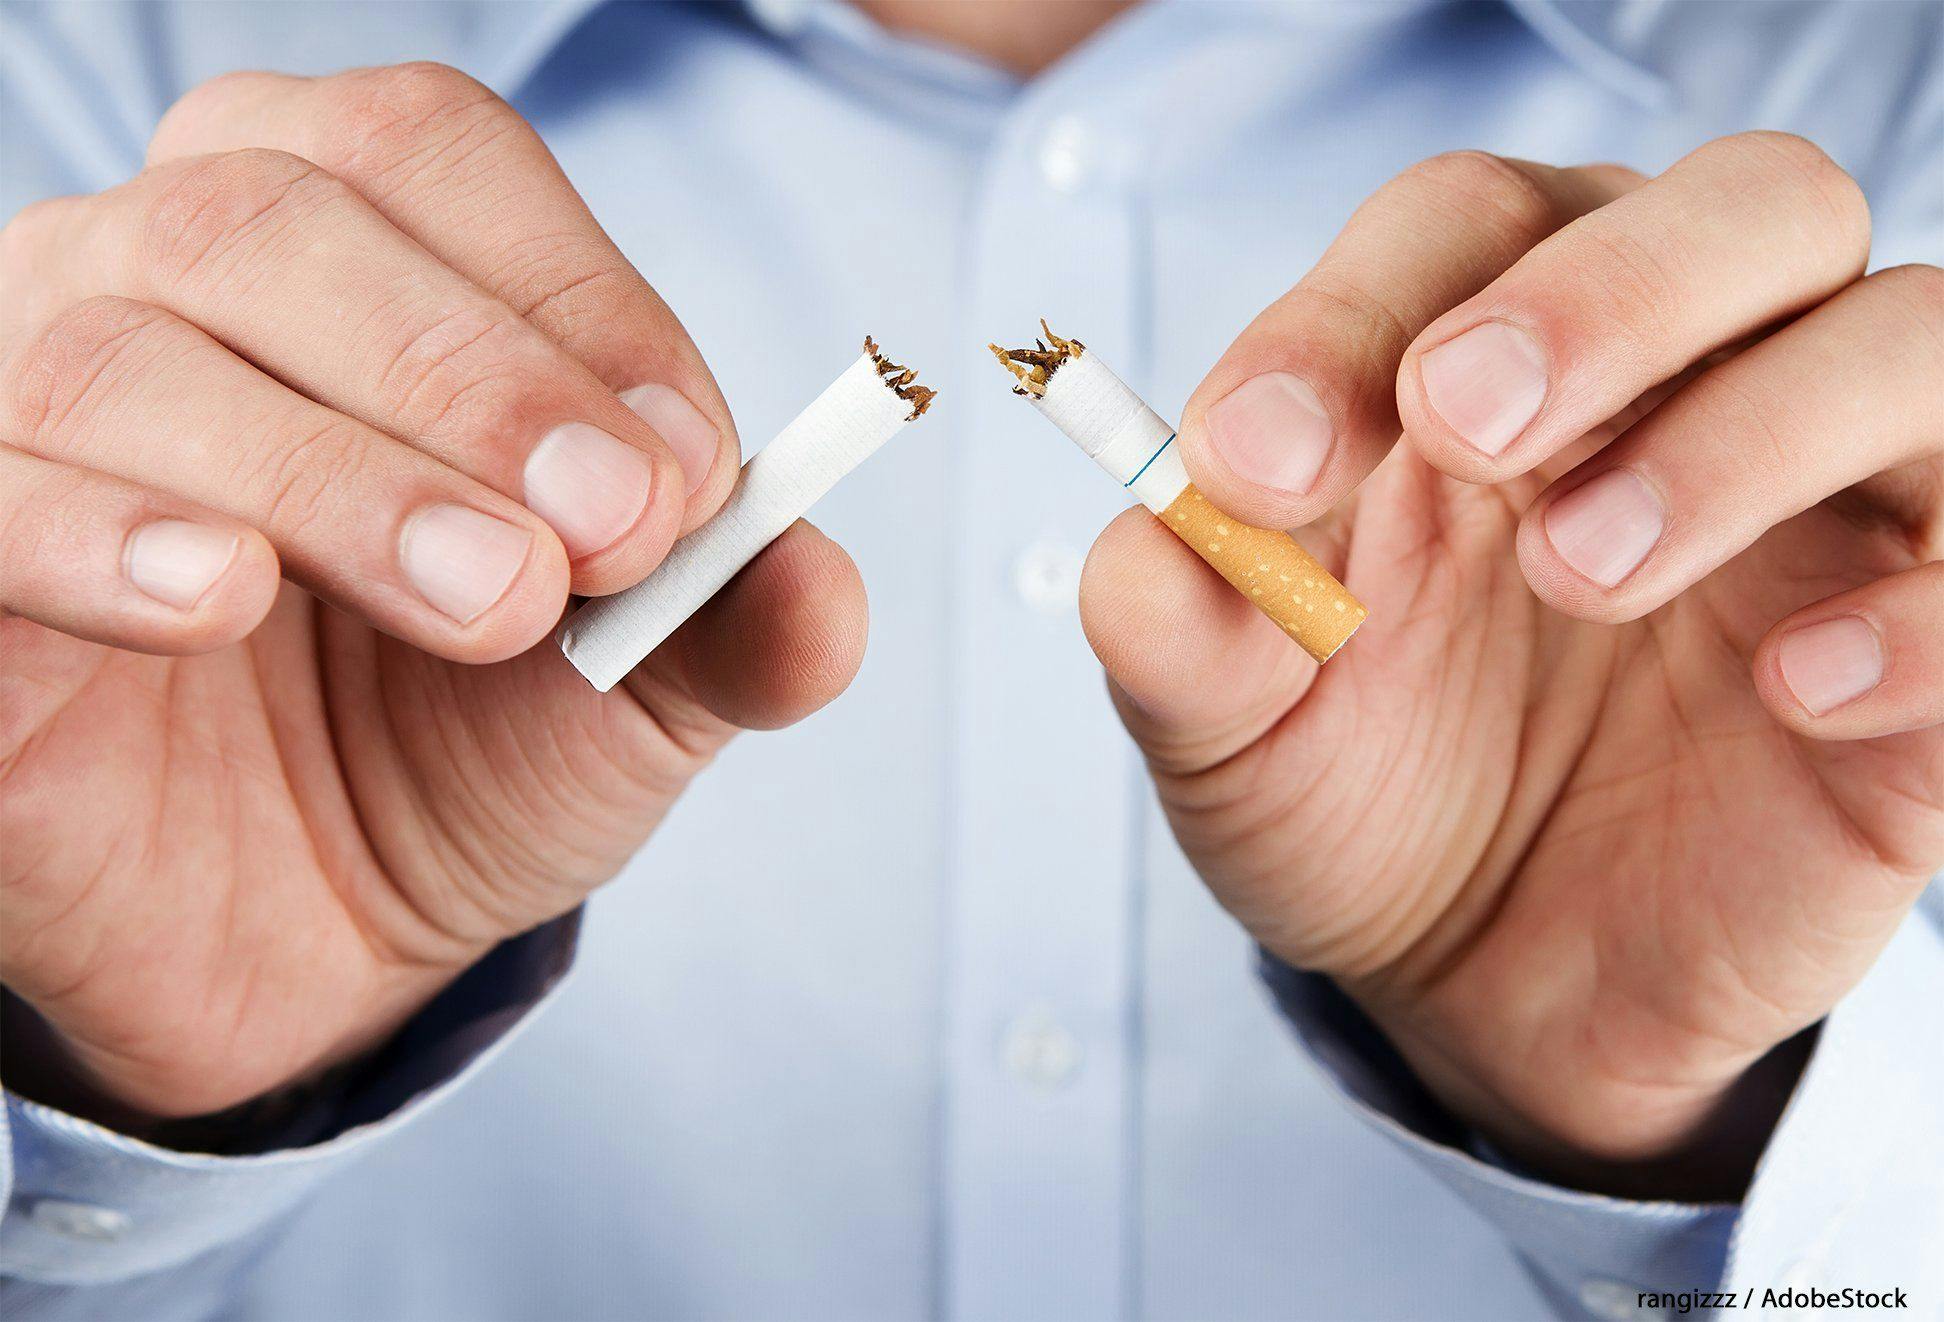 Saving money may lead to longer life, ‘but just don’t smoke’